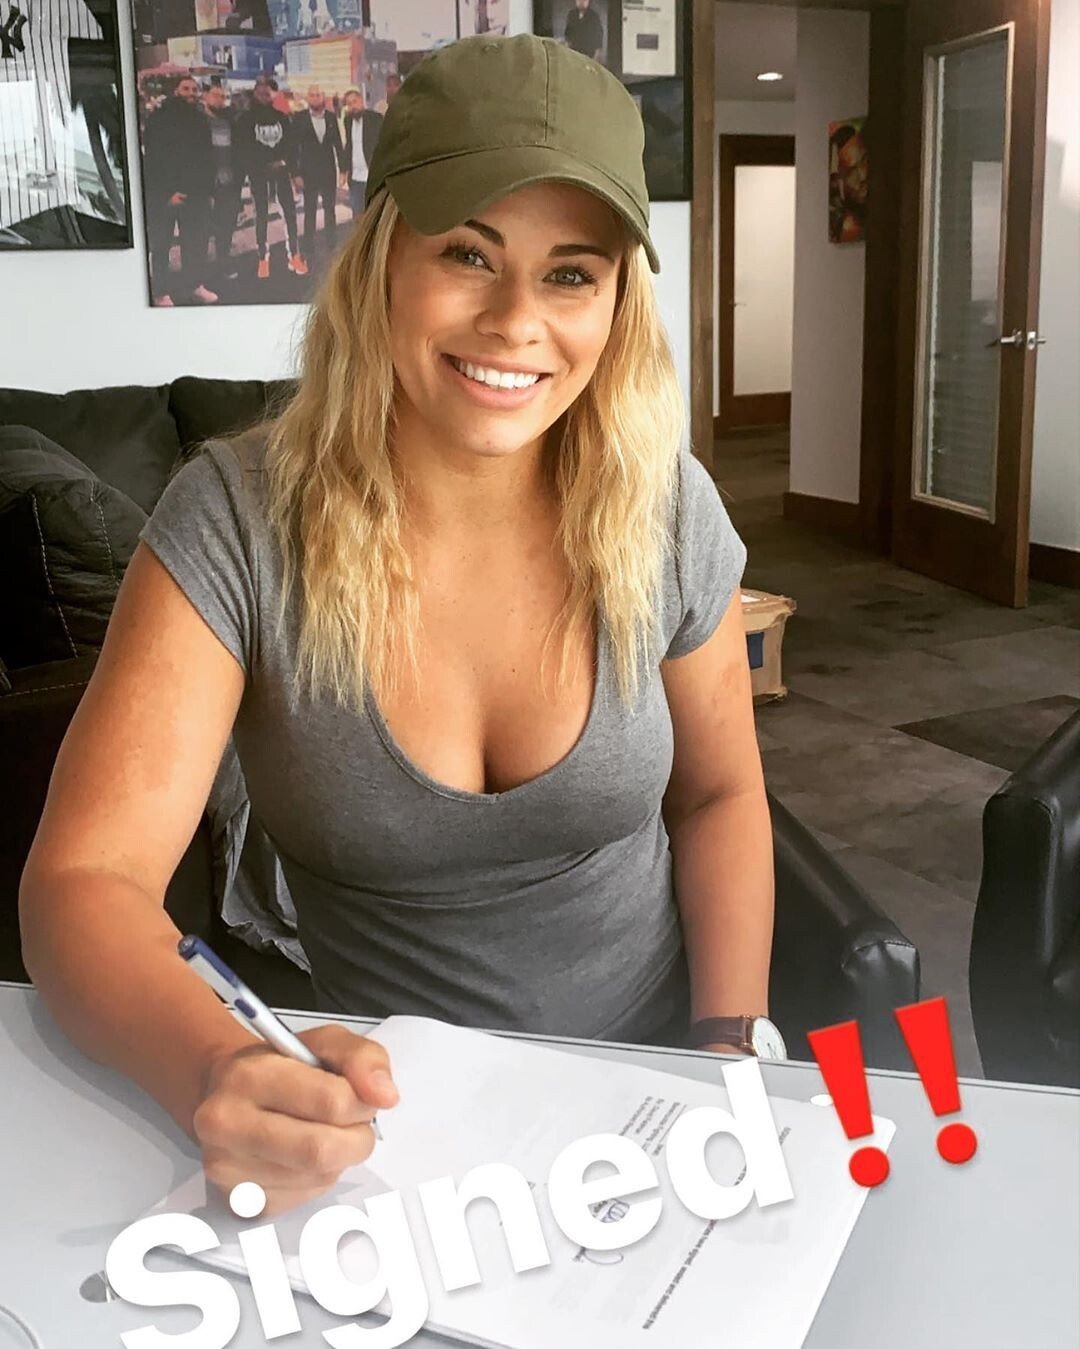 Paige Vanzant signs her new Bare Knuckle Fighting Championship deal. Photo: Instagram